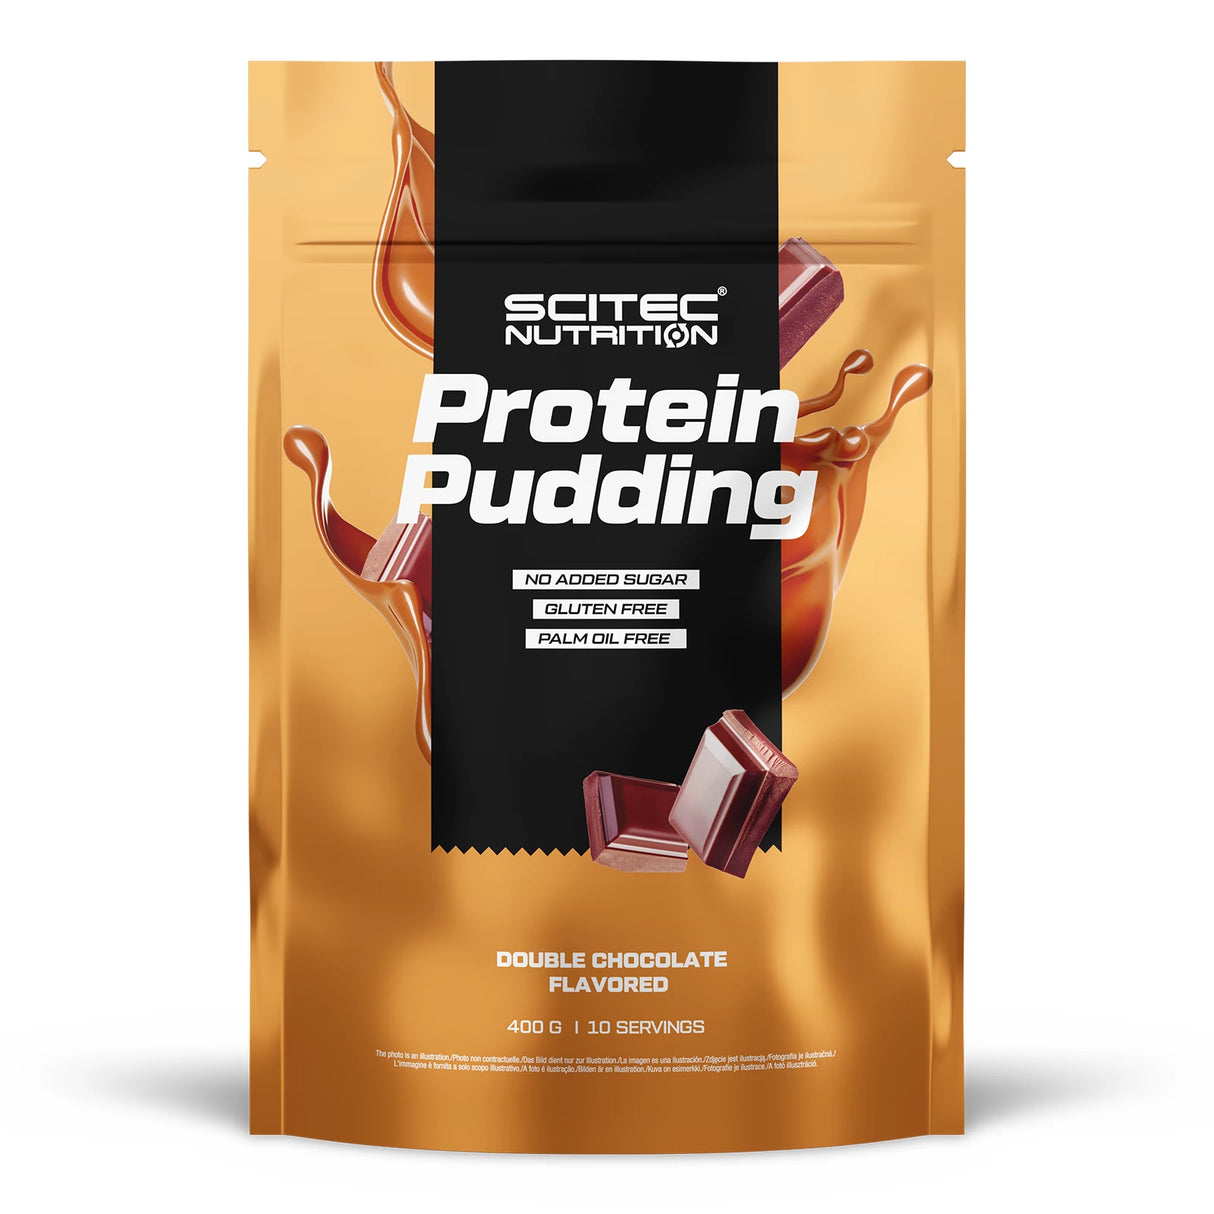 PROTEIN PUDDING - 400G Scitec Nutrition